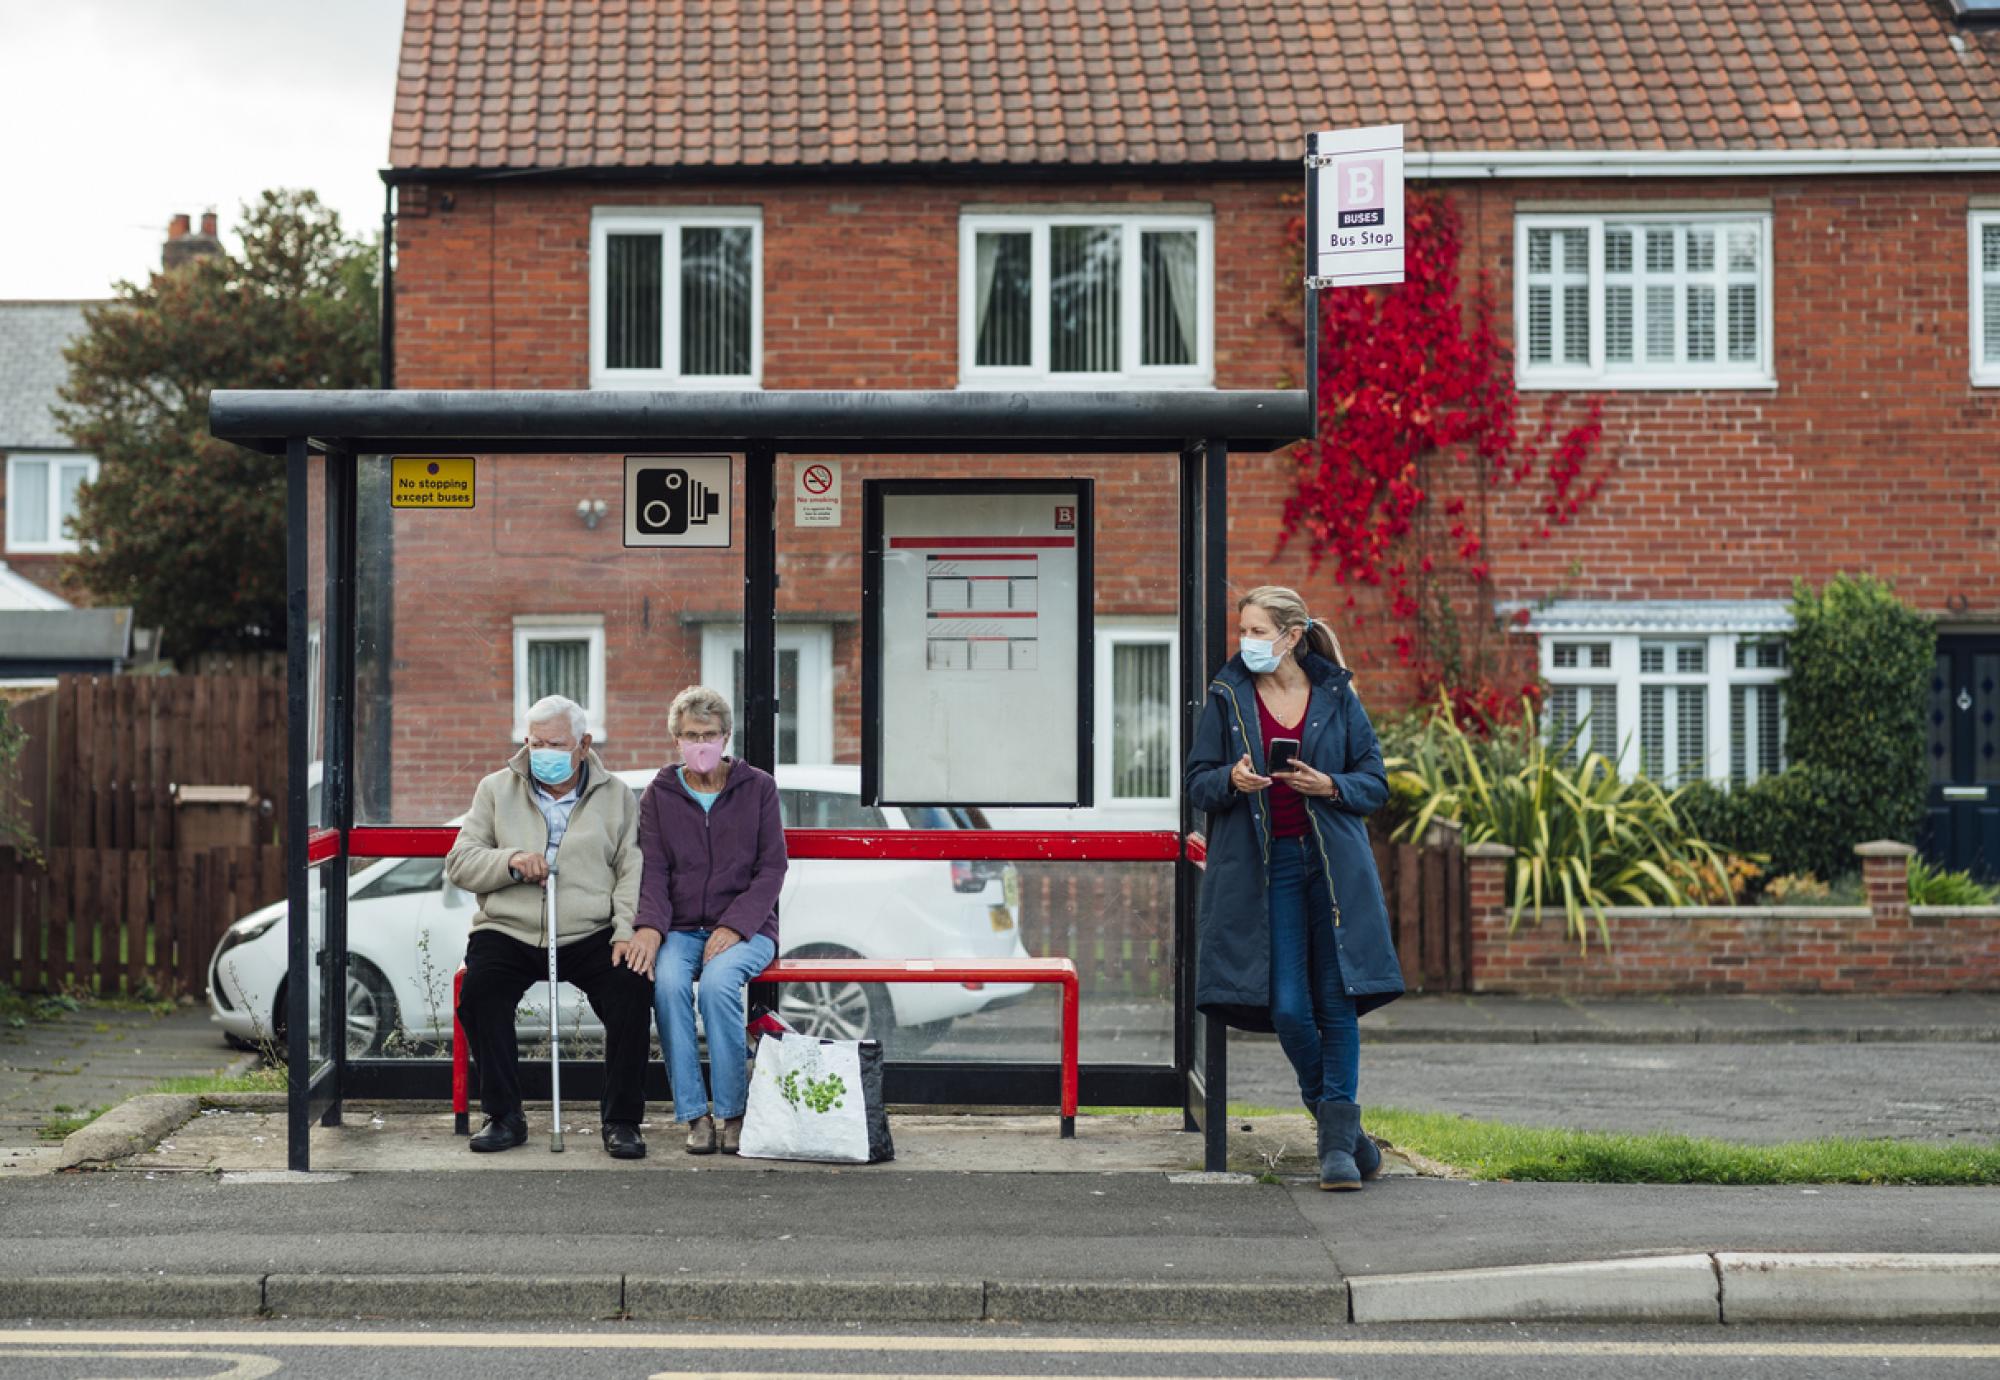 Bus stop in England